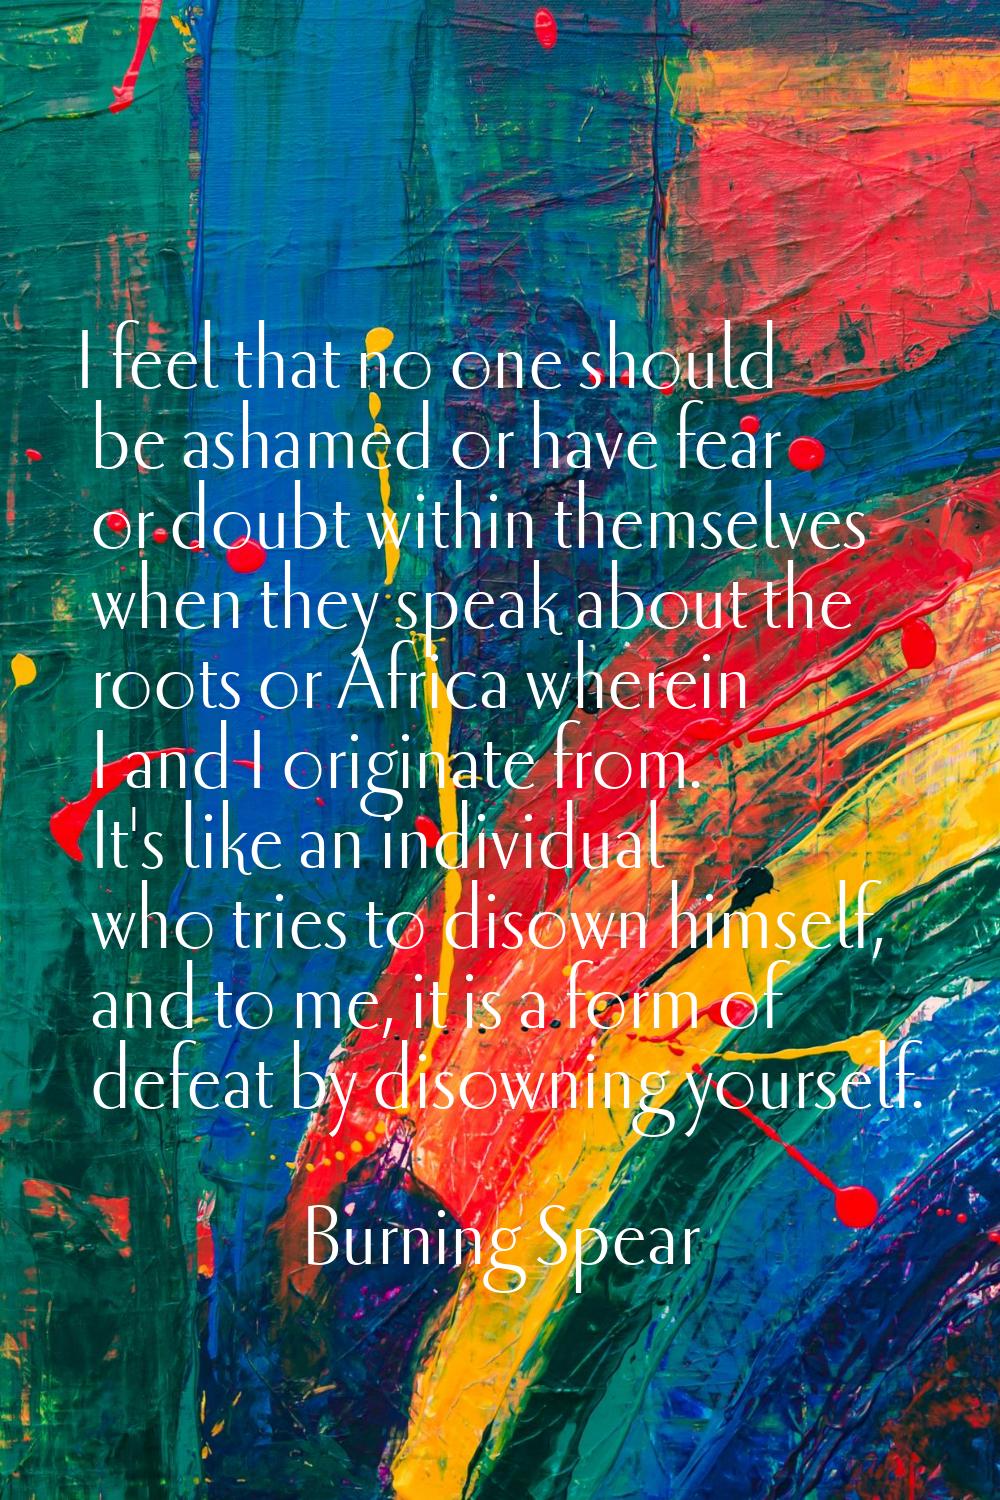 I feel that no one should be ashamed or have fear or doubt within themselves when they speak about 